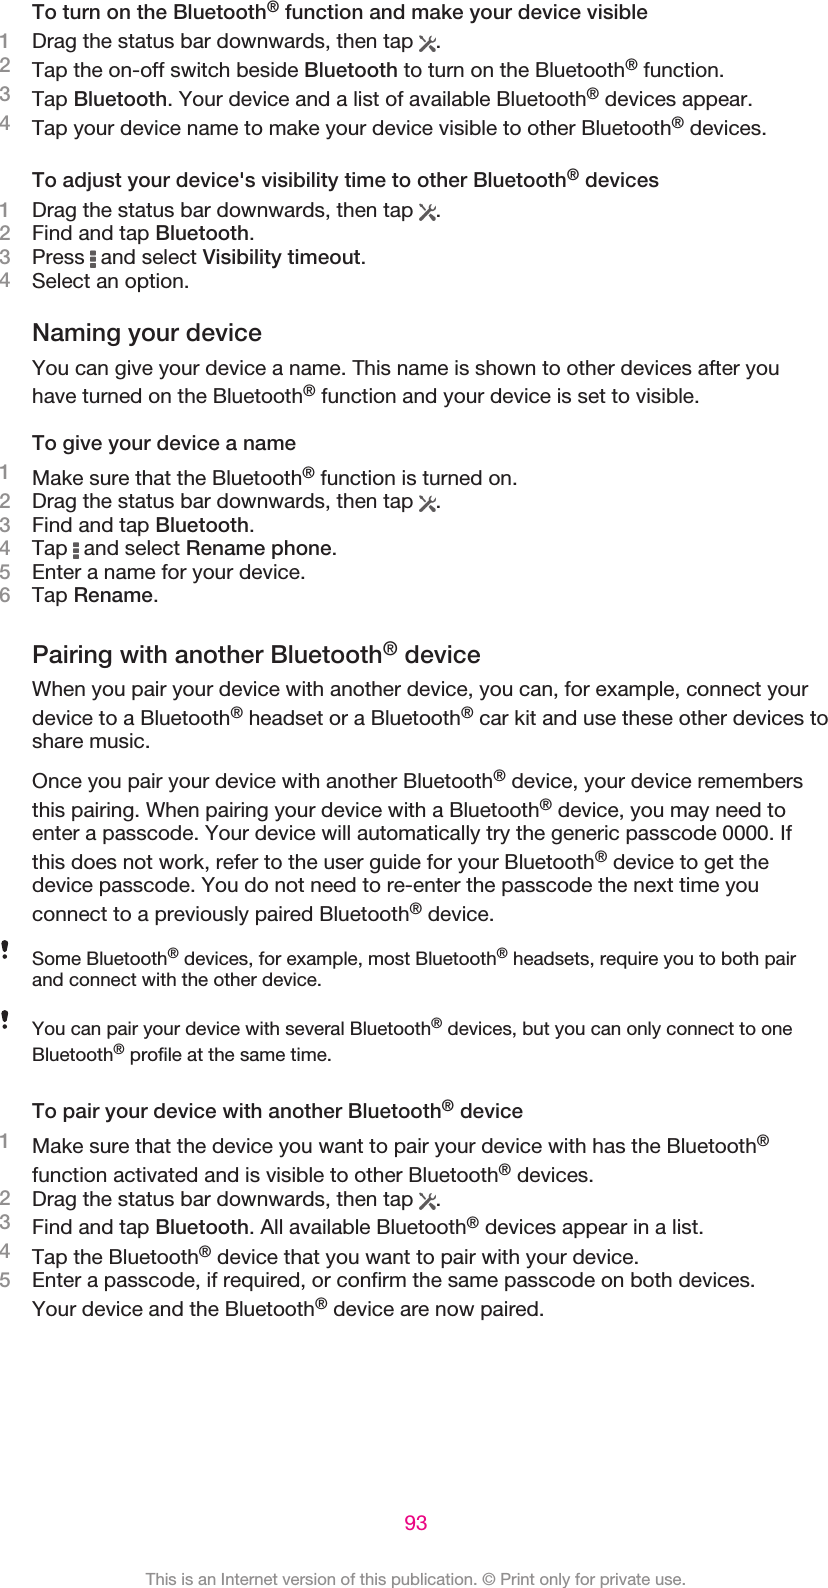 To turn on the Bluetooth® function and make your device visible1Drag the status bar downwards, then tap  .2Tap the on-off switch beside Bluetooth to turn on the Bluetooth® function.3Tap Bluetooth. Your device and a list of available Bluetooth® devices appear.4Tap your device name to make your device visible to other Bluetooth® devices.To adjust your device&apos;s visibility time to other Bluetooth® devices1Drag the status bar downwards, then tap  .2Find and tap Bluetooth.3Press   and select Visibility timeout.4Select an option.Naming your deviceYou can give your device a name. This name is shown to other devices after youhave turned on the Bluetooth® function and your device is set to visible.To give your device a name1Make sure that the Bluetooth® function is turned on.2Drag the status bar downwards, then tap  .3Find and tap Bluetooth.4Tap   and select Rename phone.5Enter a name for your device.6Tap Rename.Pairing with another Bluetooth® deviceWhen you pair your device with another device, you can, for example, connect yourdevice to a Bluetooth® headset or a Bluetooth® car kit and use these other devices toshare music.Once you pair your device with another Bluetooth® device, your device remembersthis pairing. When pairing your device with a Bluetooth® device, you may need toenter a passcode. Your device will automatically try the generic passcode 0000. Ifthis does not work, refer to the user guide for your Bluetooth® device to get thedevice passcode. You do not need to re-enter the passcode the next time youconnect to a previously paired Bluetooth® device.Some Bluetooth® devices, for example, most Bluetooth® headsets, require you to both pairand connect with the other device.You can pair your device with several Bluetooth® devices, but you can only connect to oneBluetooth® profile at the same time.To pair your device with another Bluetooth® device1Make sure that the device you want to pair your device with has the Bluetooth®function activated and is visible to other Bluetooth® devices.2Drag the status bar downwards, then tap  .3Find and tap Bluetooth. All available Bluetooth® devices appear in a list.4Tap the Bluetooth® device that you want to pair with your device.5Enter a passcode, if required, or confirm the same passcode on both devices.Your device and the Bluetooth® device are now paired.93This is an Internet version of this publication. © Print only for private use.